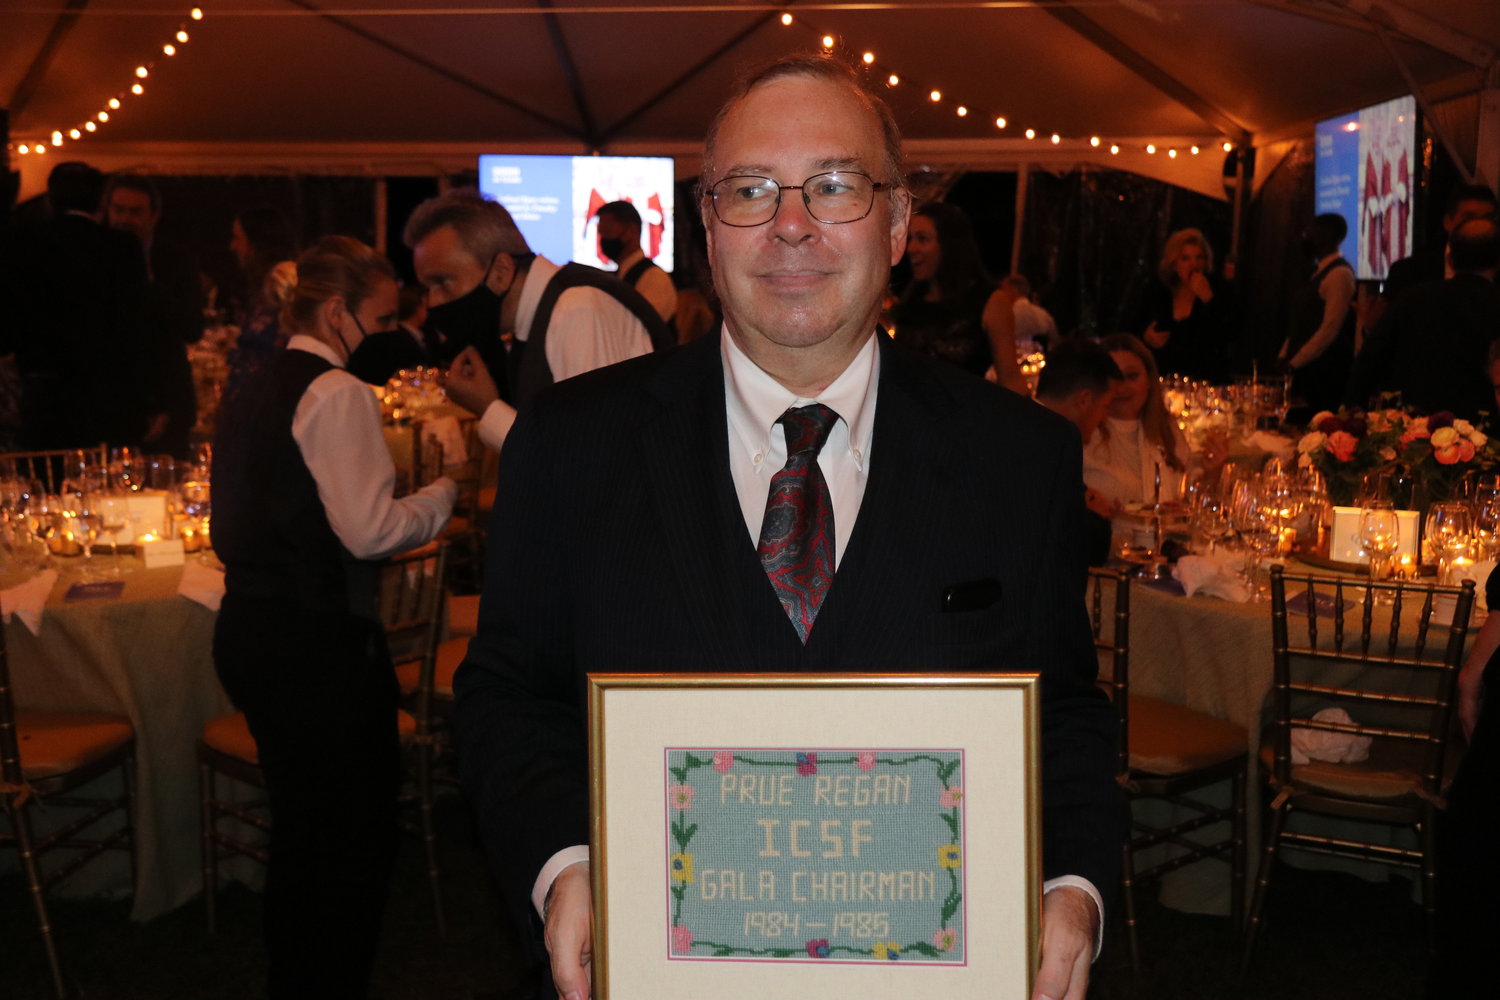 William Regan, at the Inner-City Scholarship Fund 50th anniversary gala, holds a framed needlepoint recognizing the service and support of his late mother, Prudence (Prue) Regan, to ICSF.